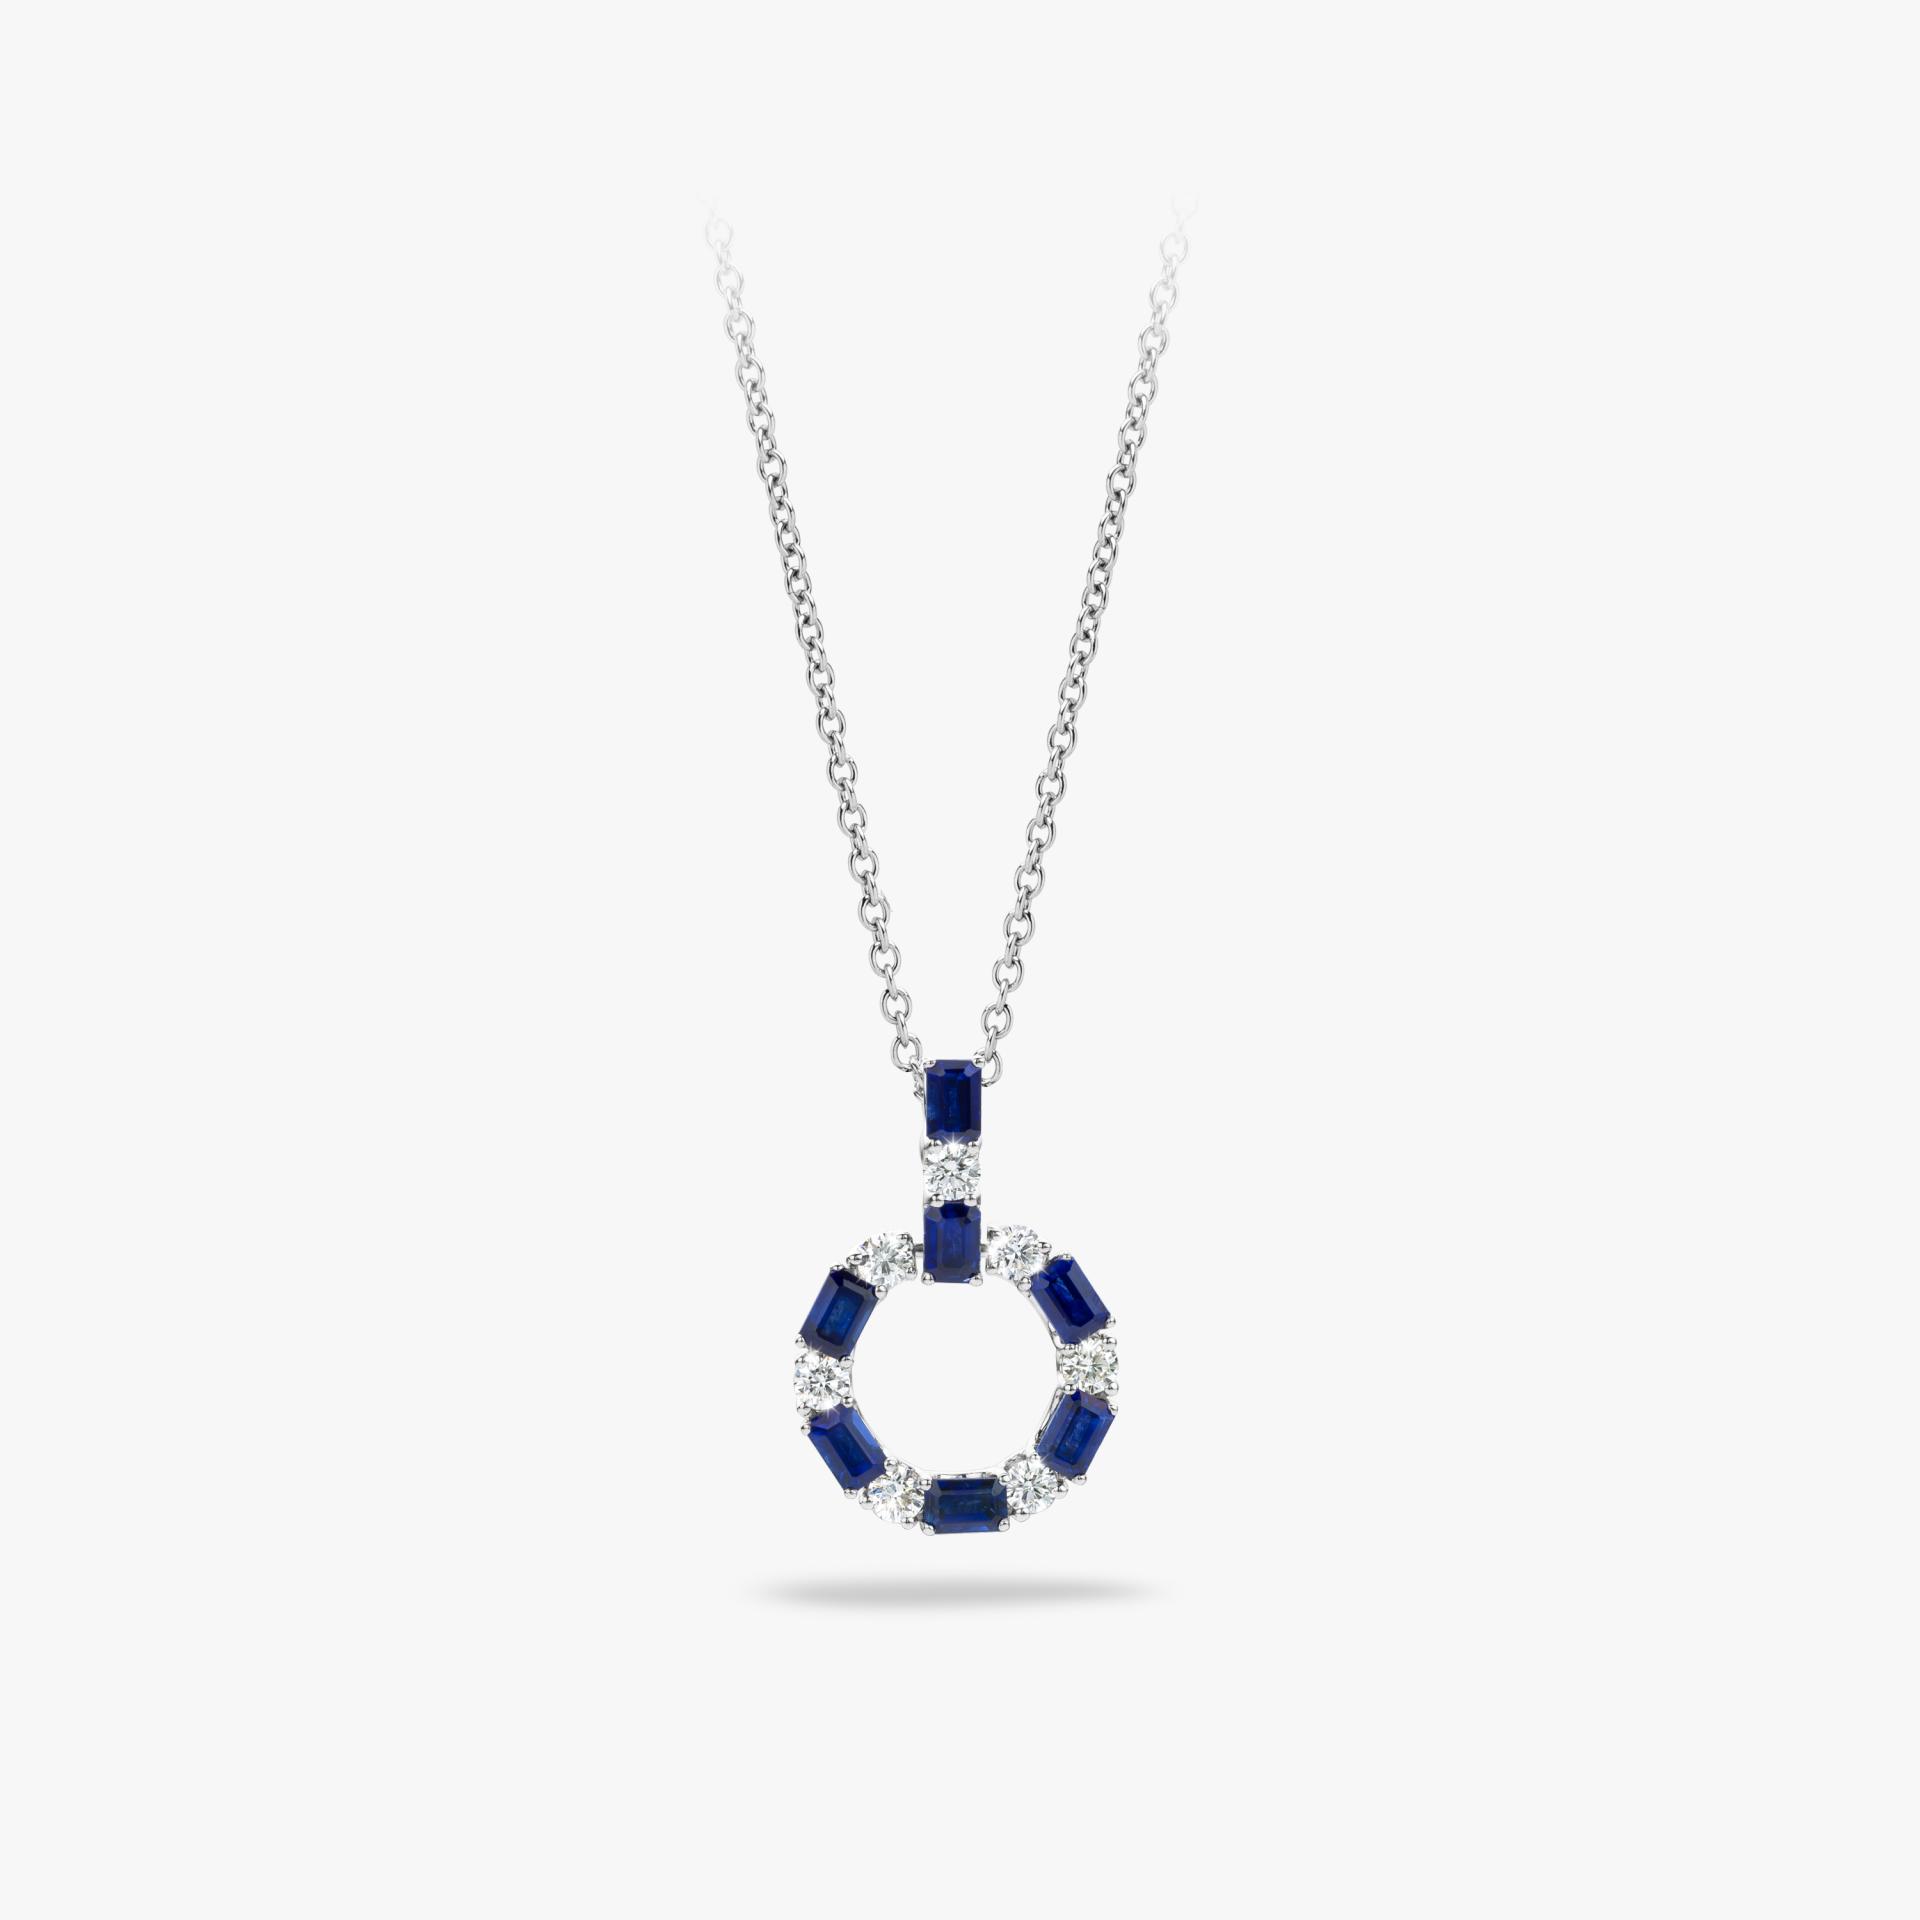 White gold pendant set with blue sapphire and brilliant cut diamonds made by Maison De Greef